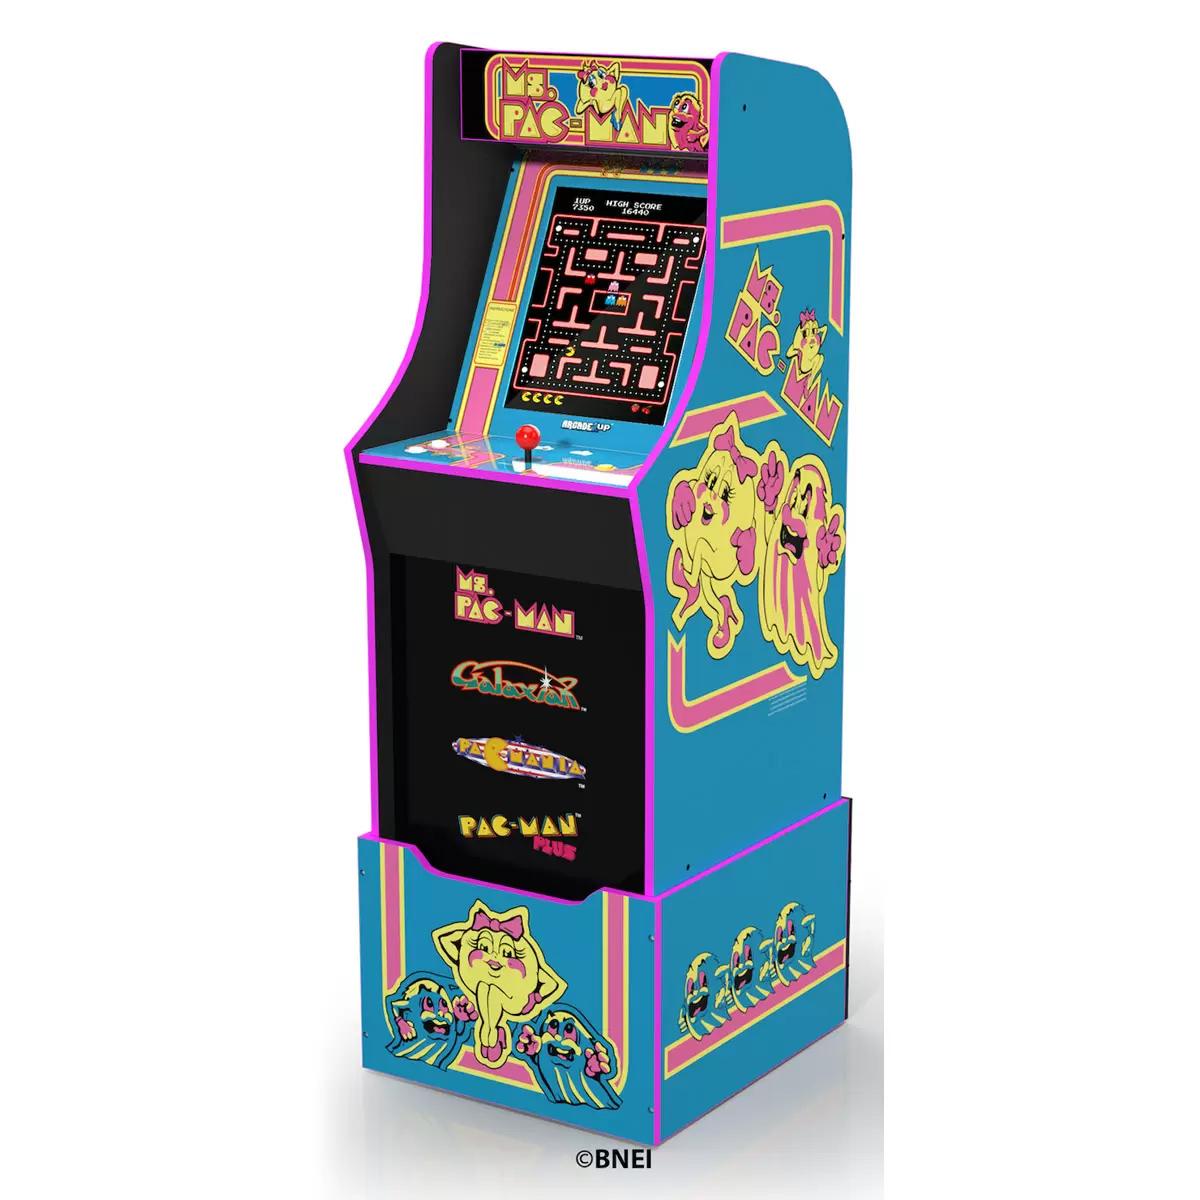 Arcade1Up Ms Pacman Arcade Machine with Riser for $246.51 Shipped